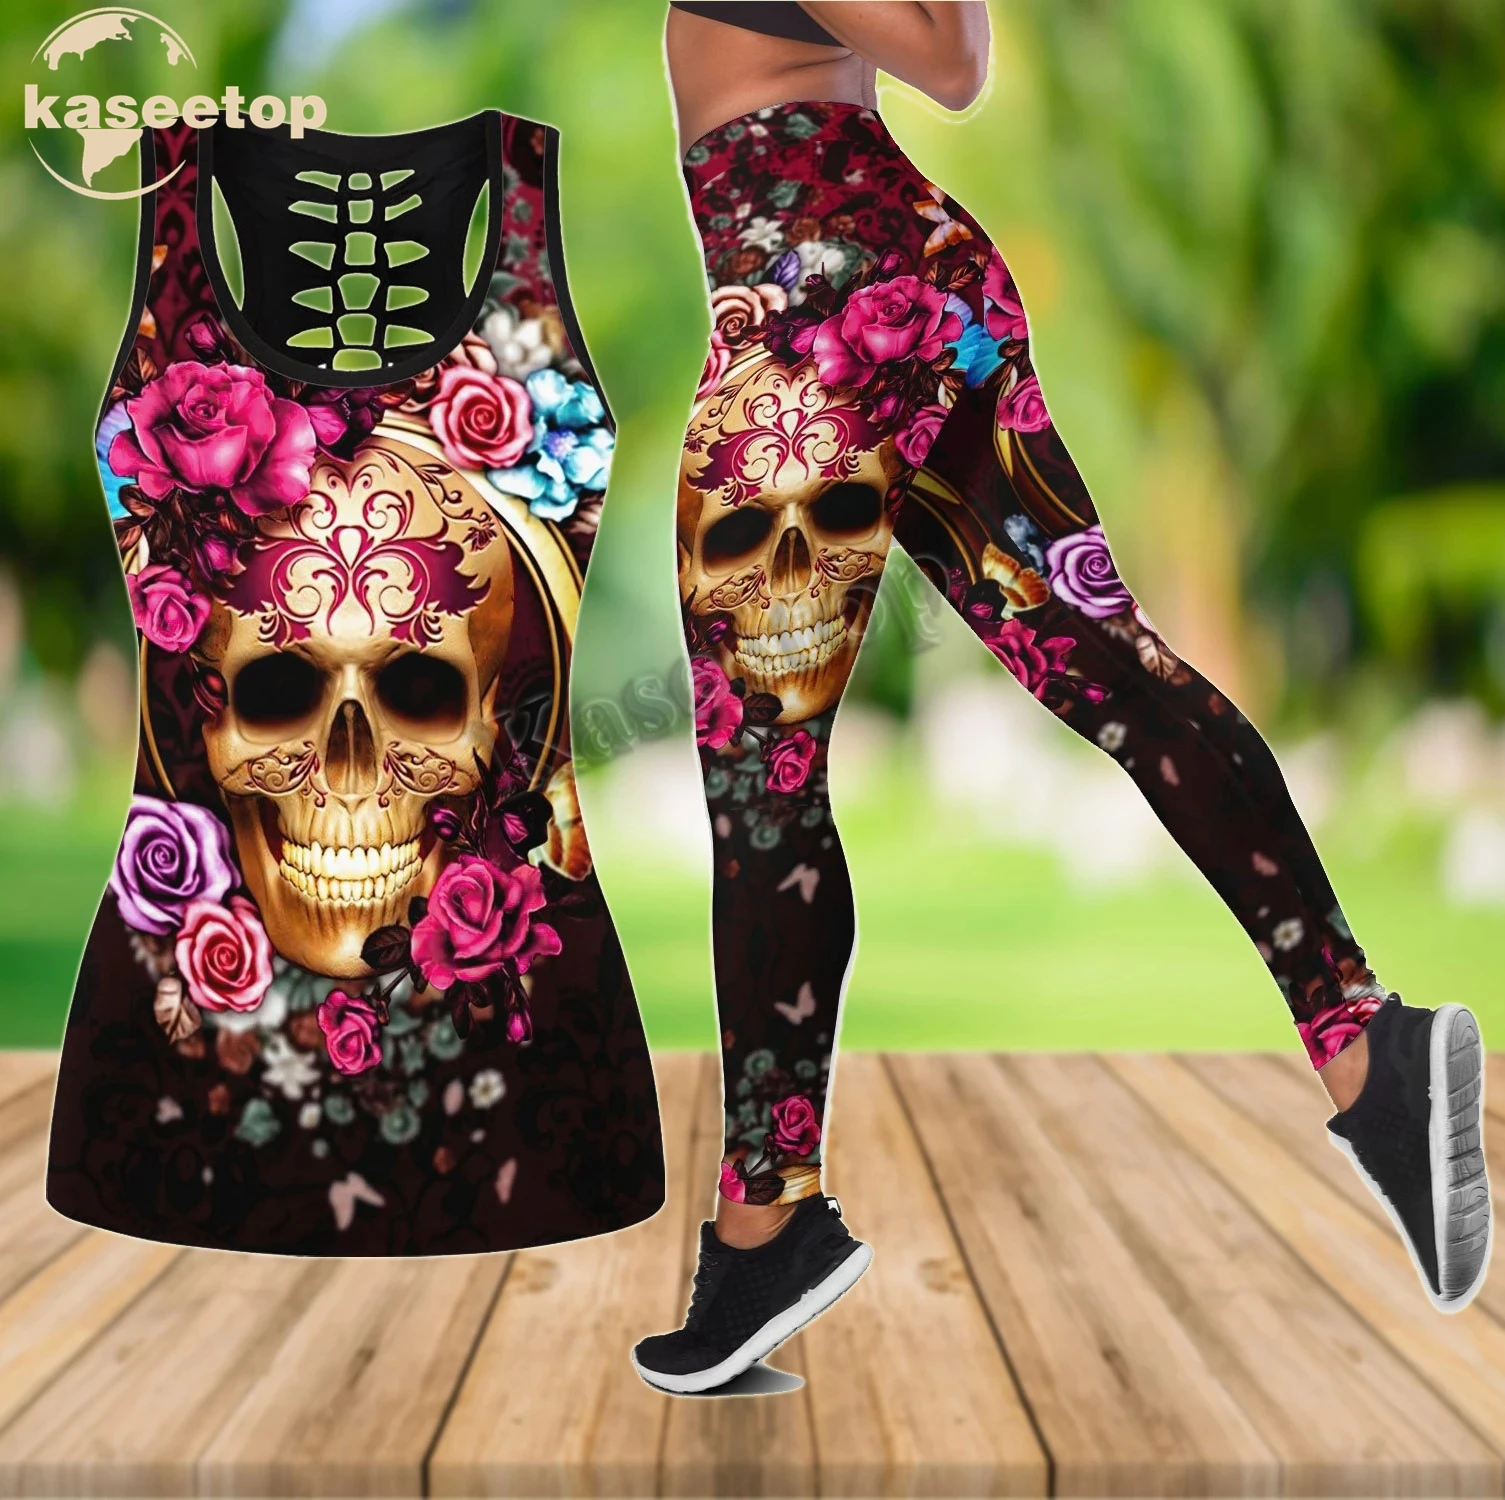 

Kaseetop 3D Floral Skull Combo Two Piece Yoga Set Women 3D Print Vest Hollow Out Hollow Tank & Legging Outfit Summer Casual LK56